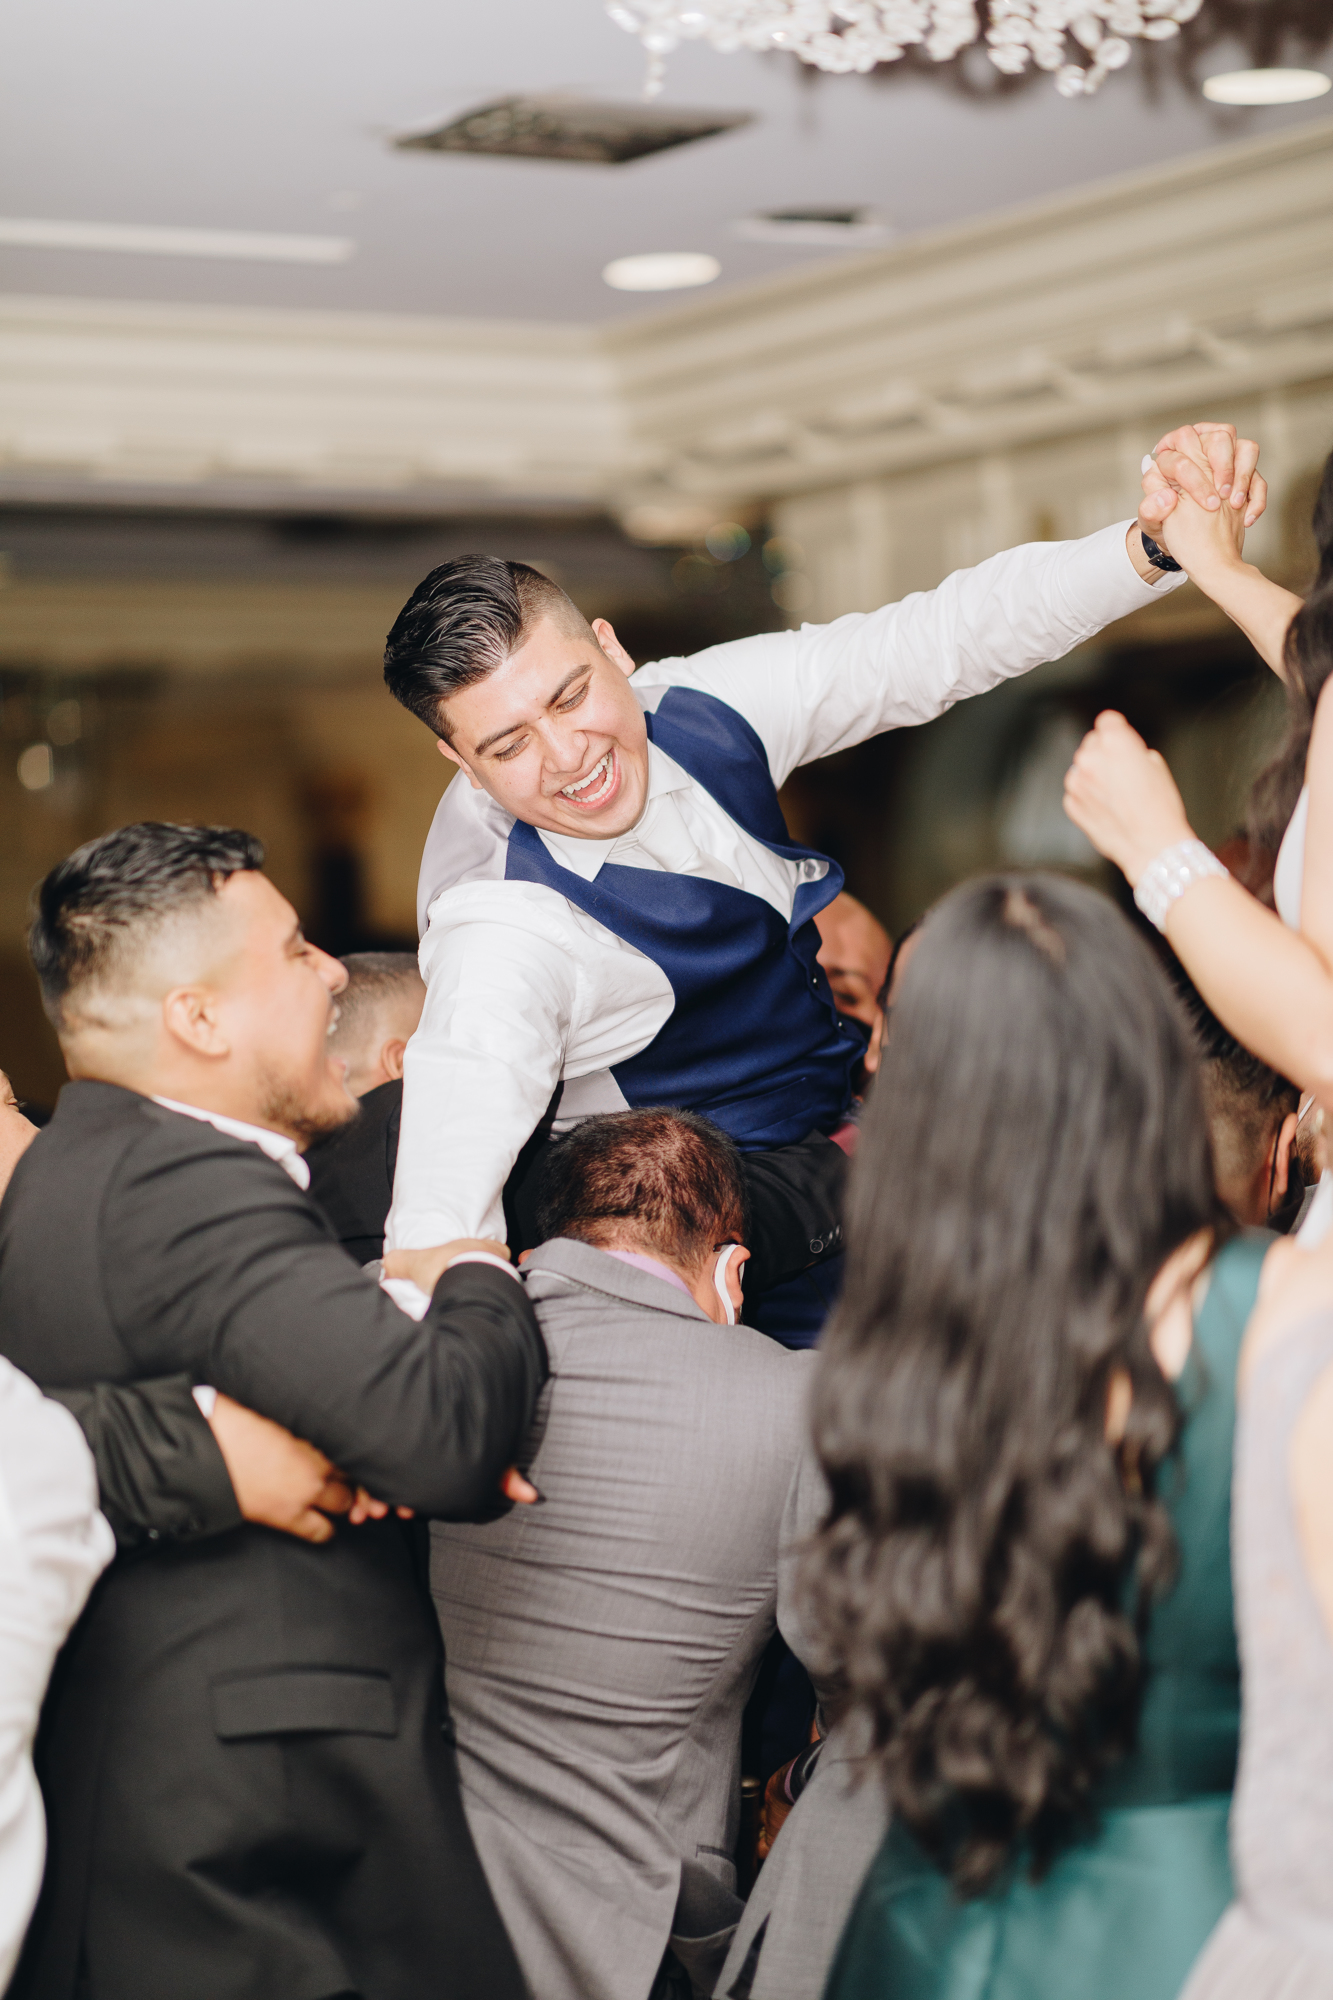 Fun candid wedding photos at the Brownstone in Paterson NJ